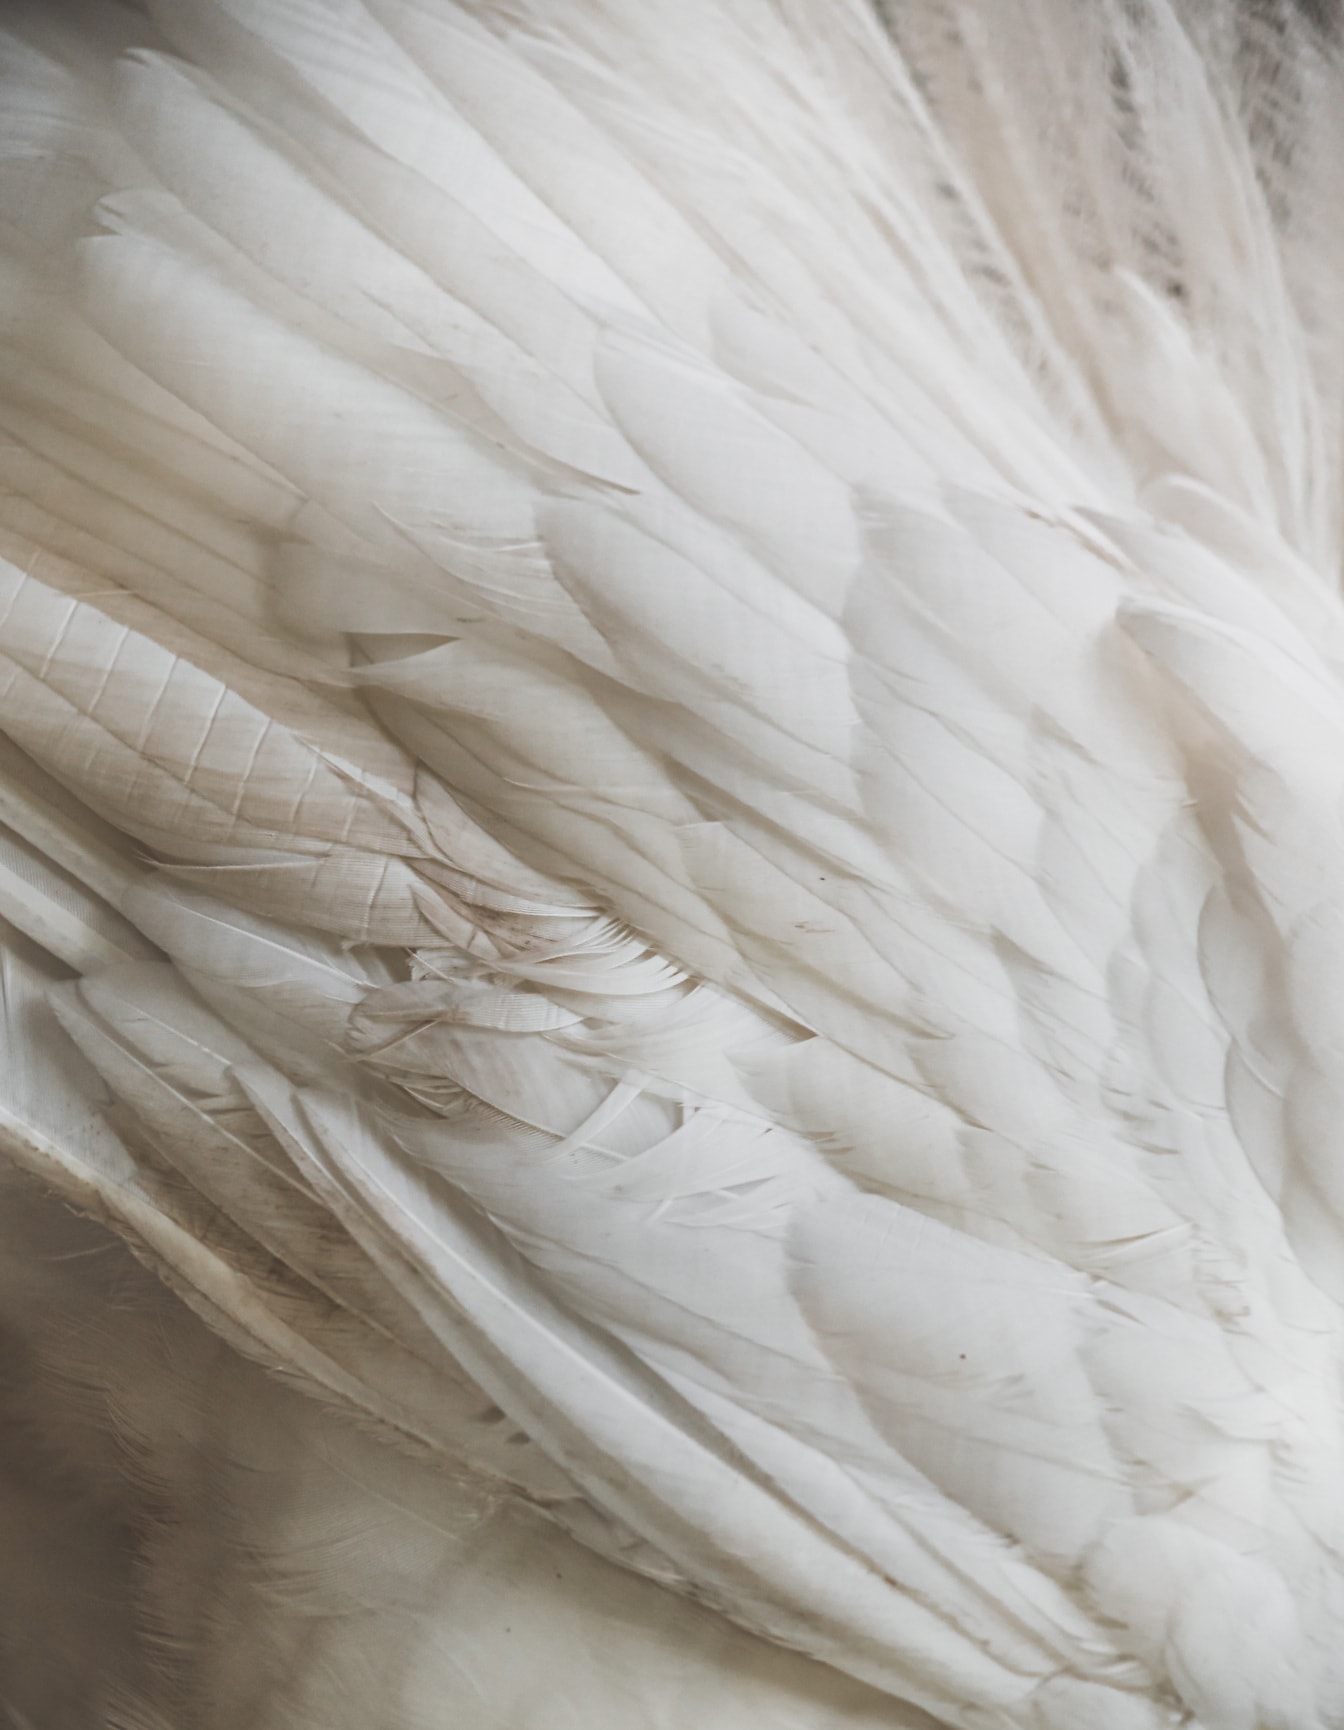 Free picture: Close-up texture of wing white feathers of bird